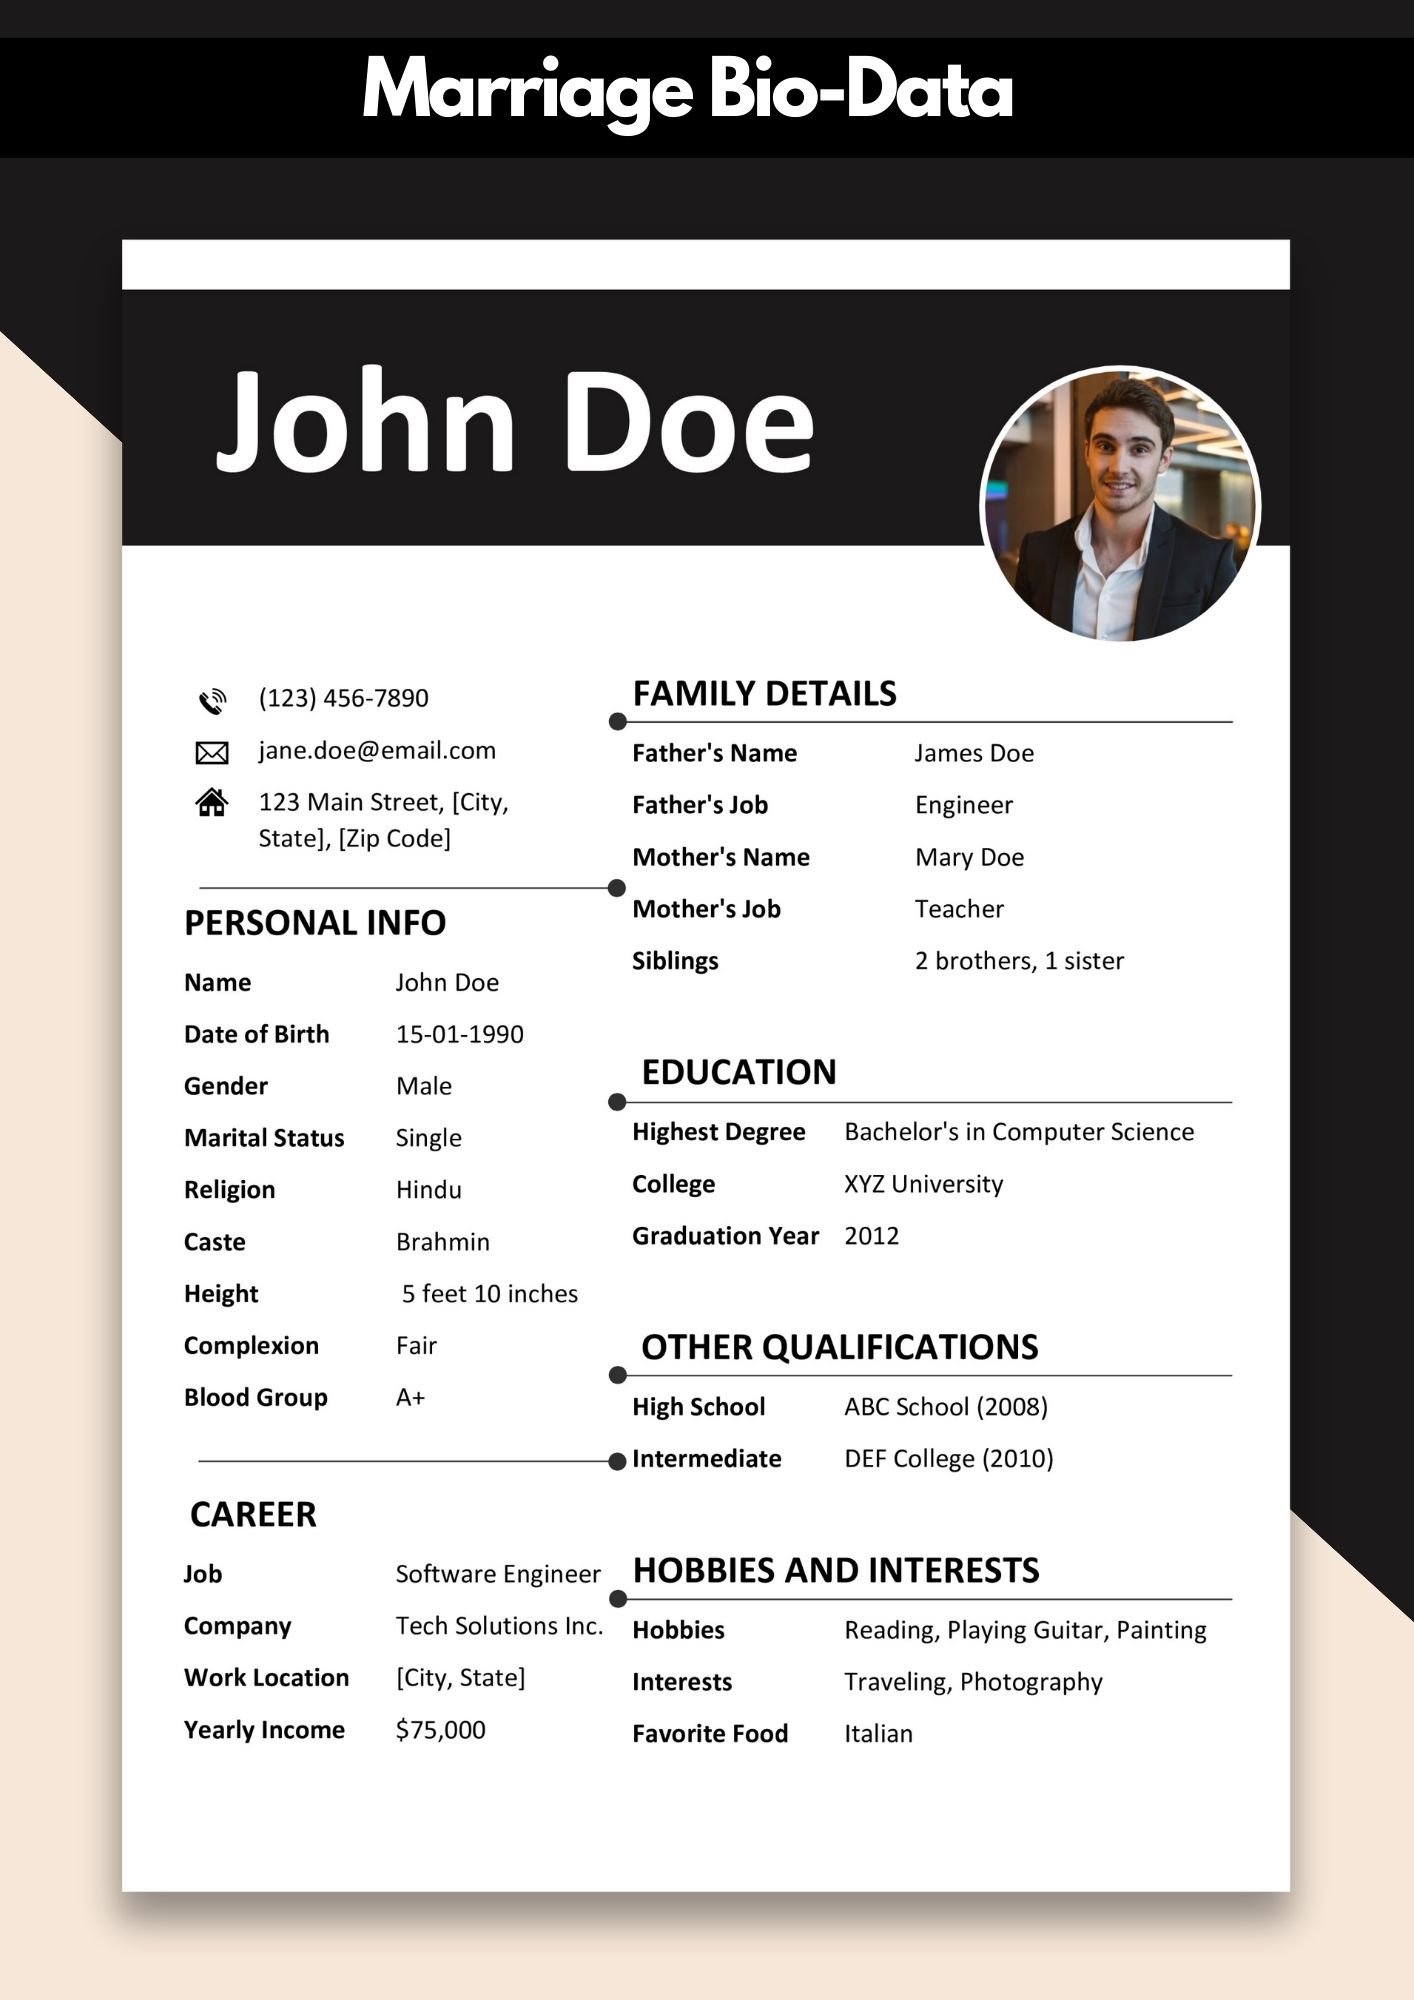 Step-By-Step Guide to Creating Your Marriage Biodata Template